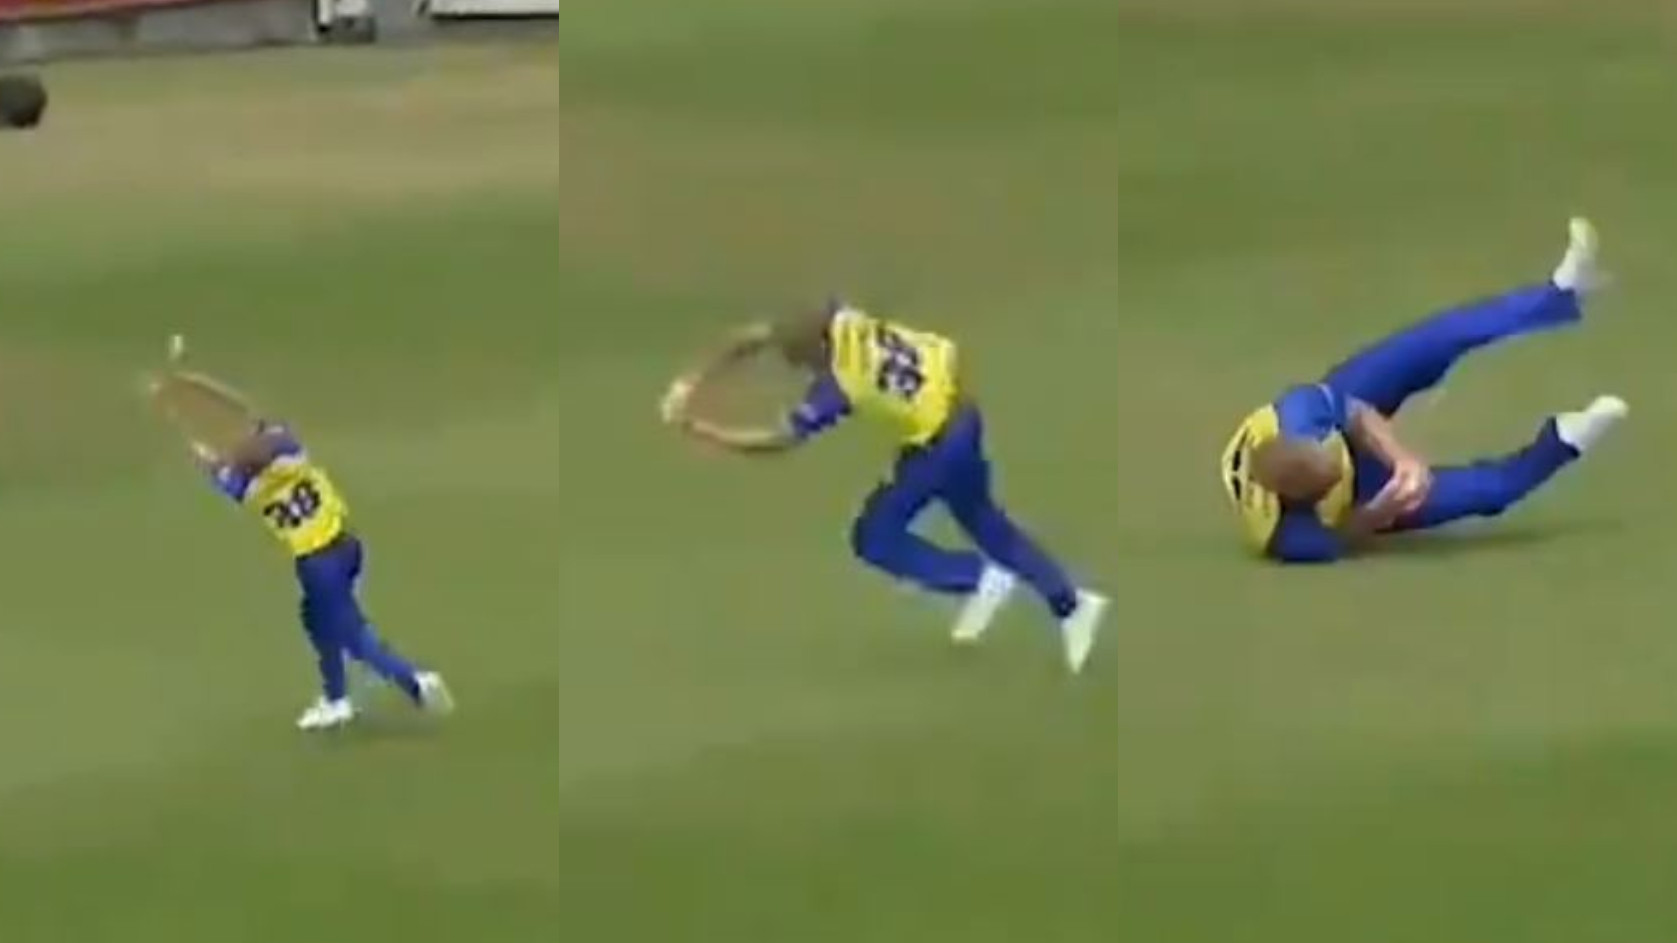 WATCH- Ben Stokes takes an amazing catch on return to cricket for Durham